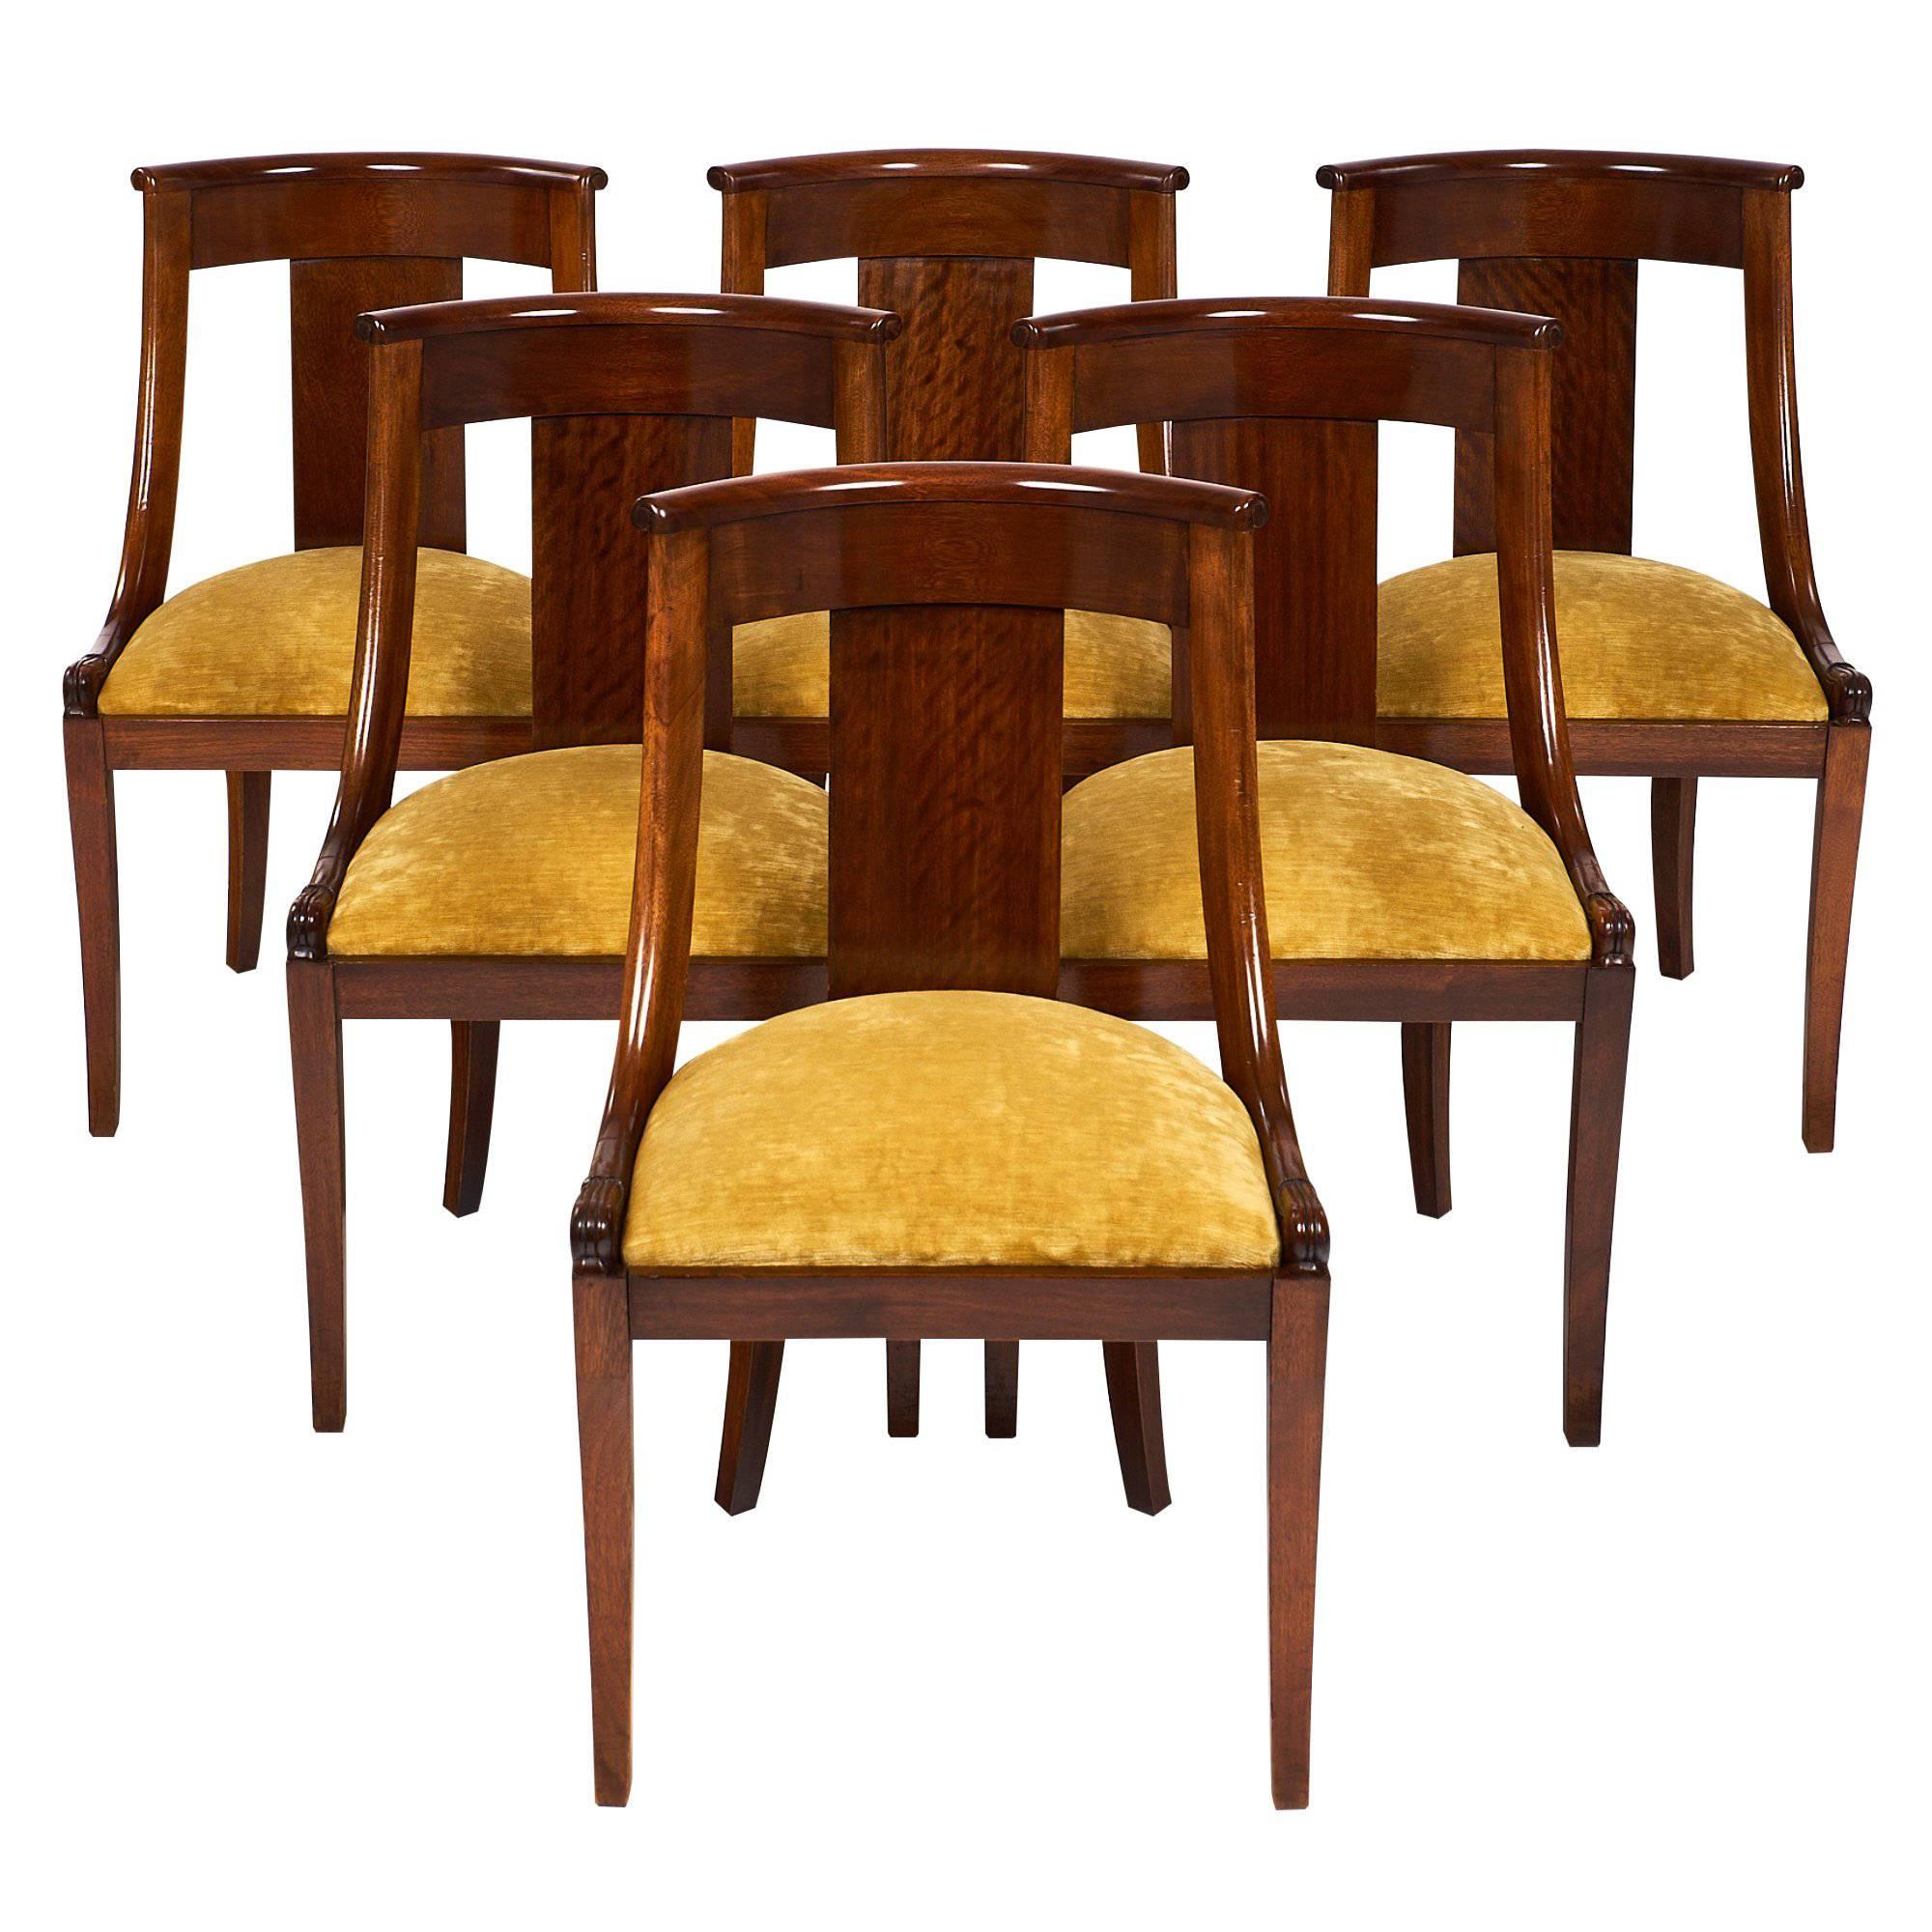 French Empire Set of “Gondole” Chairs